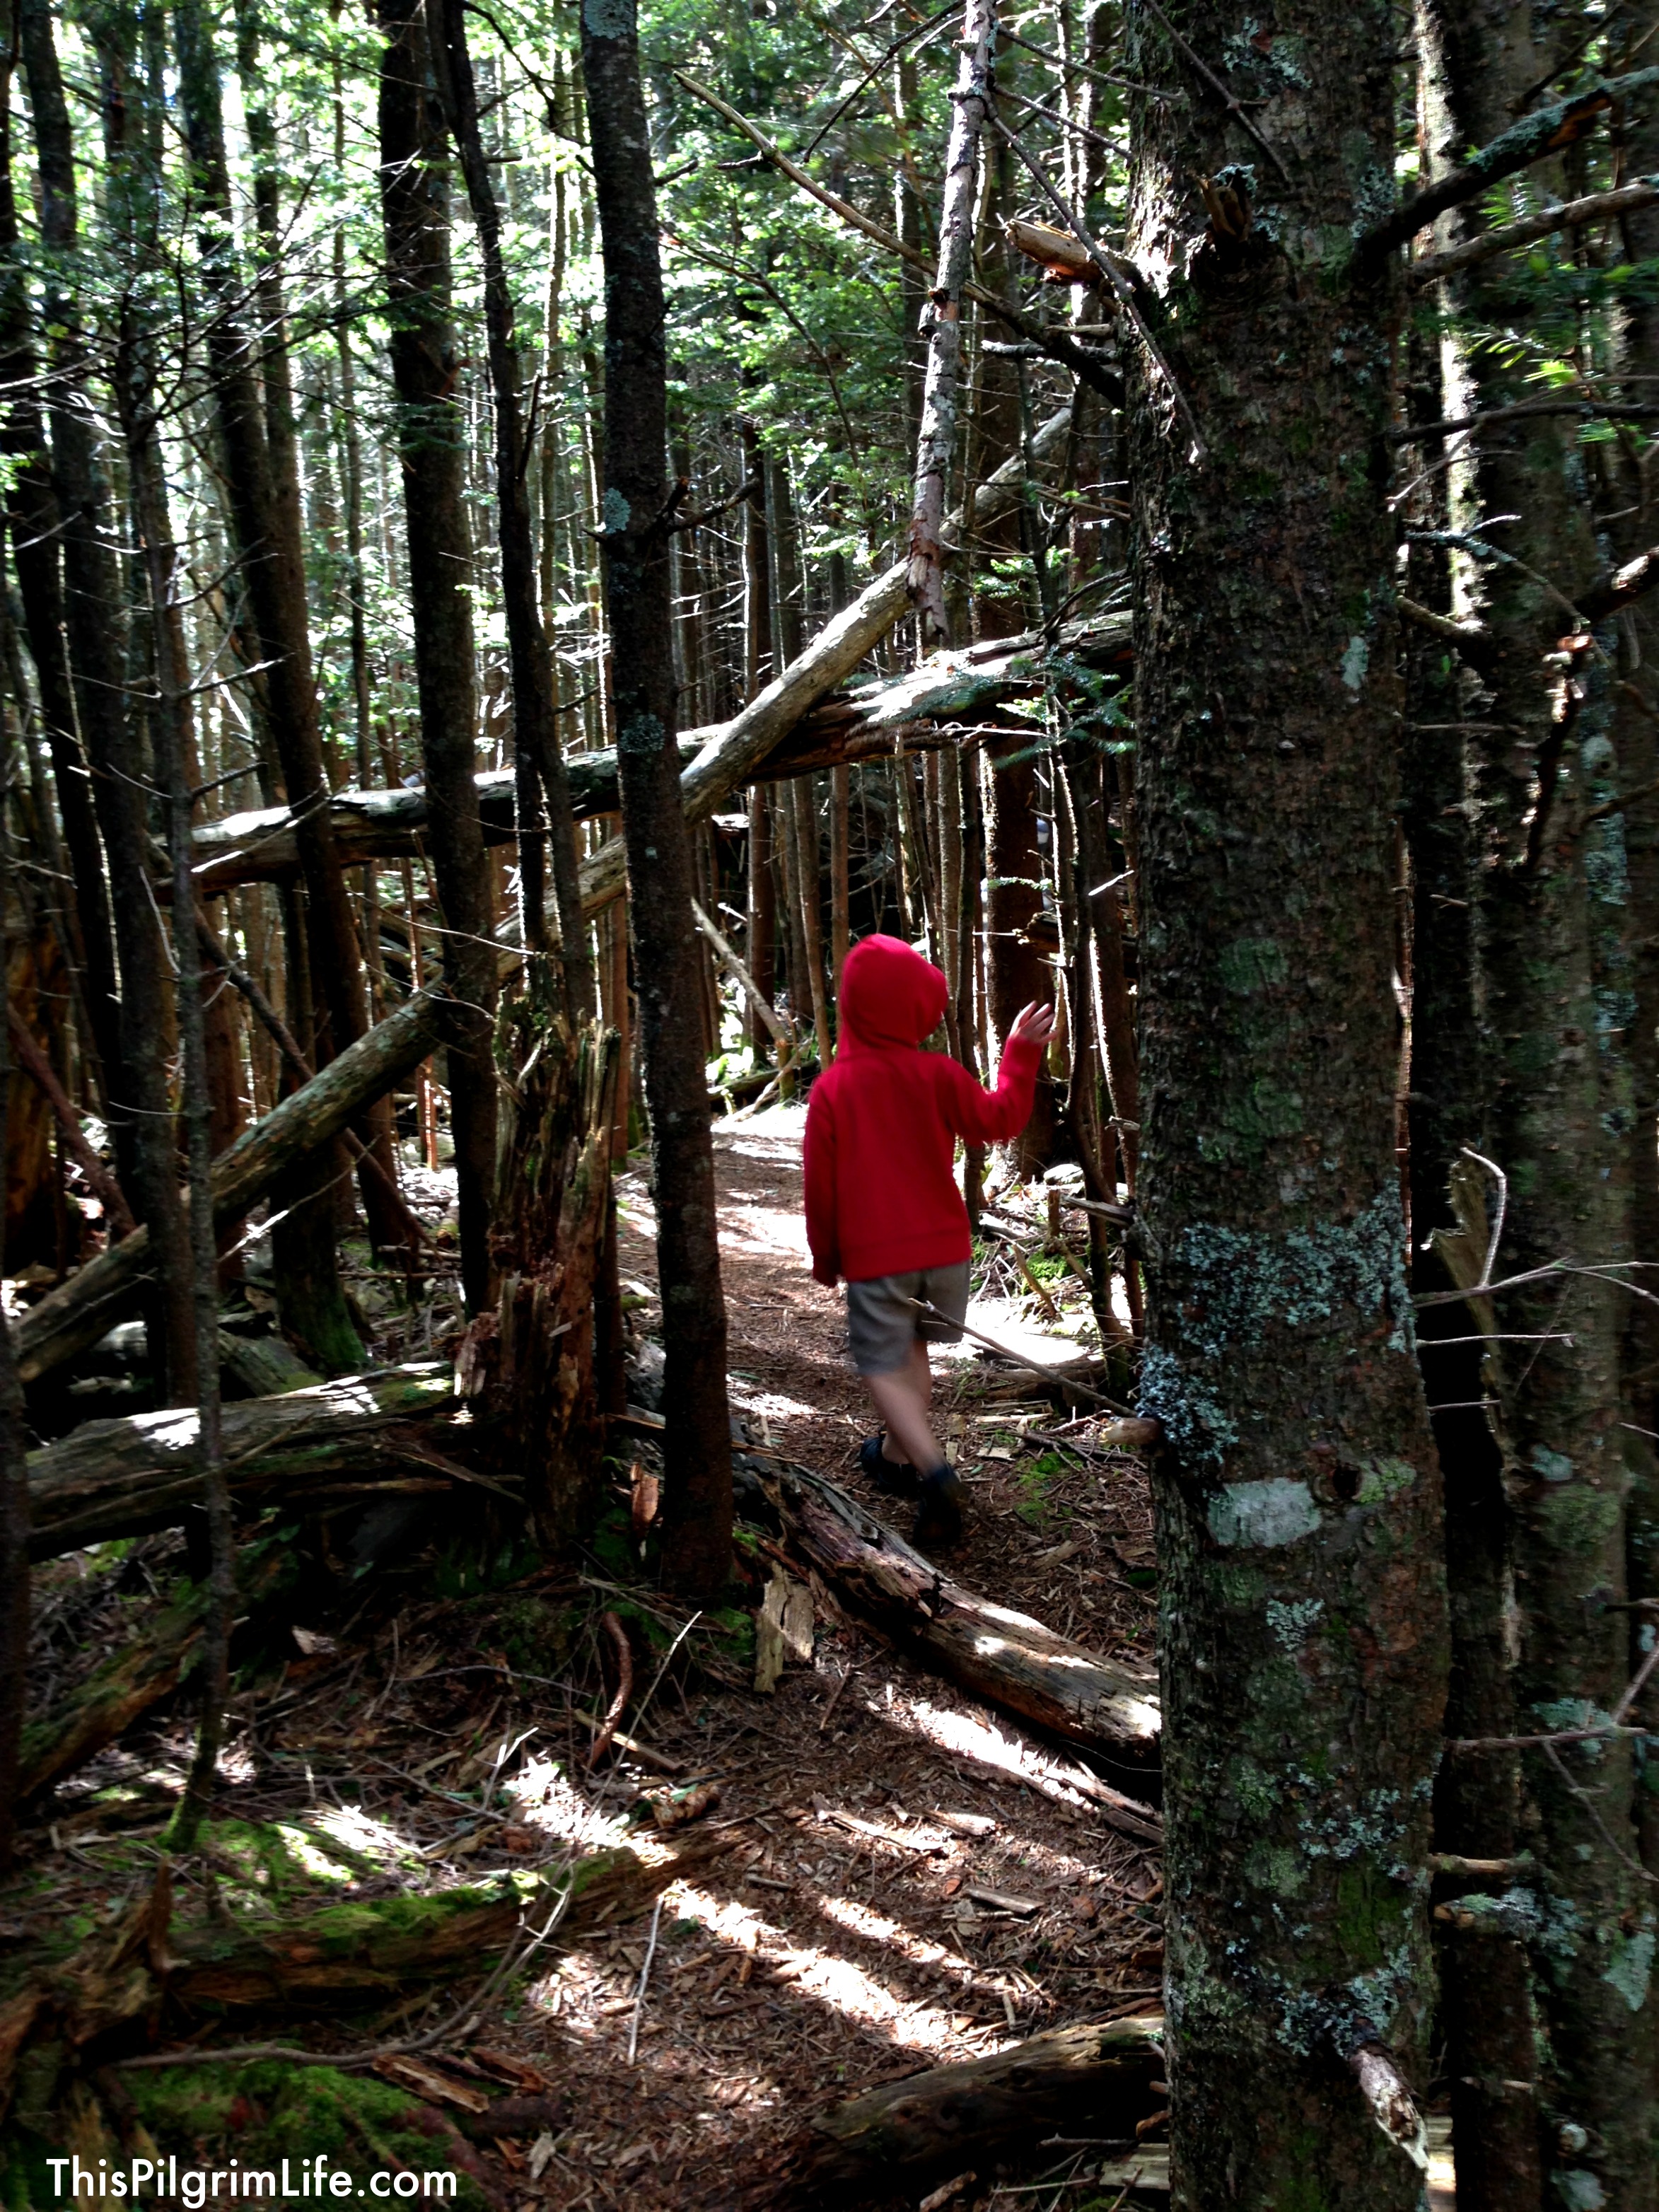 Kids in the Outdoors: Addressing Fears & Safety